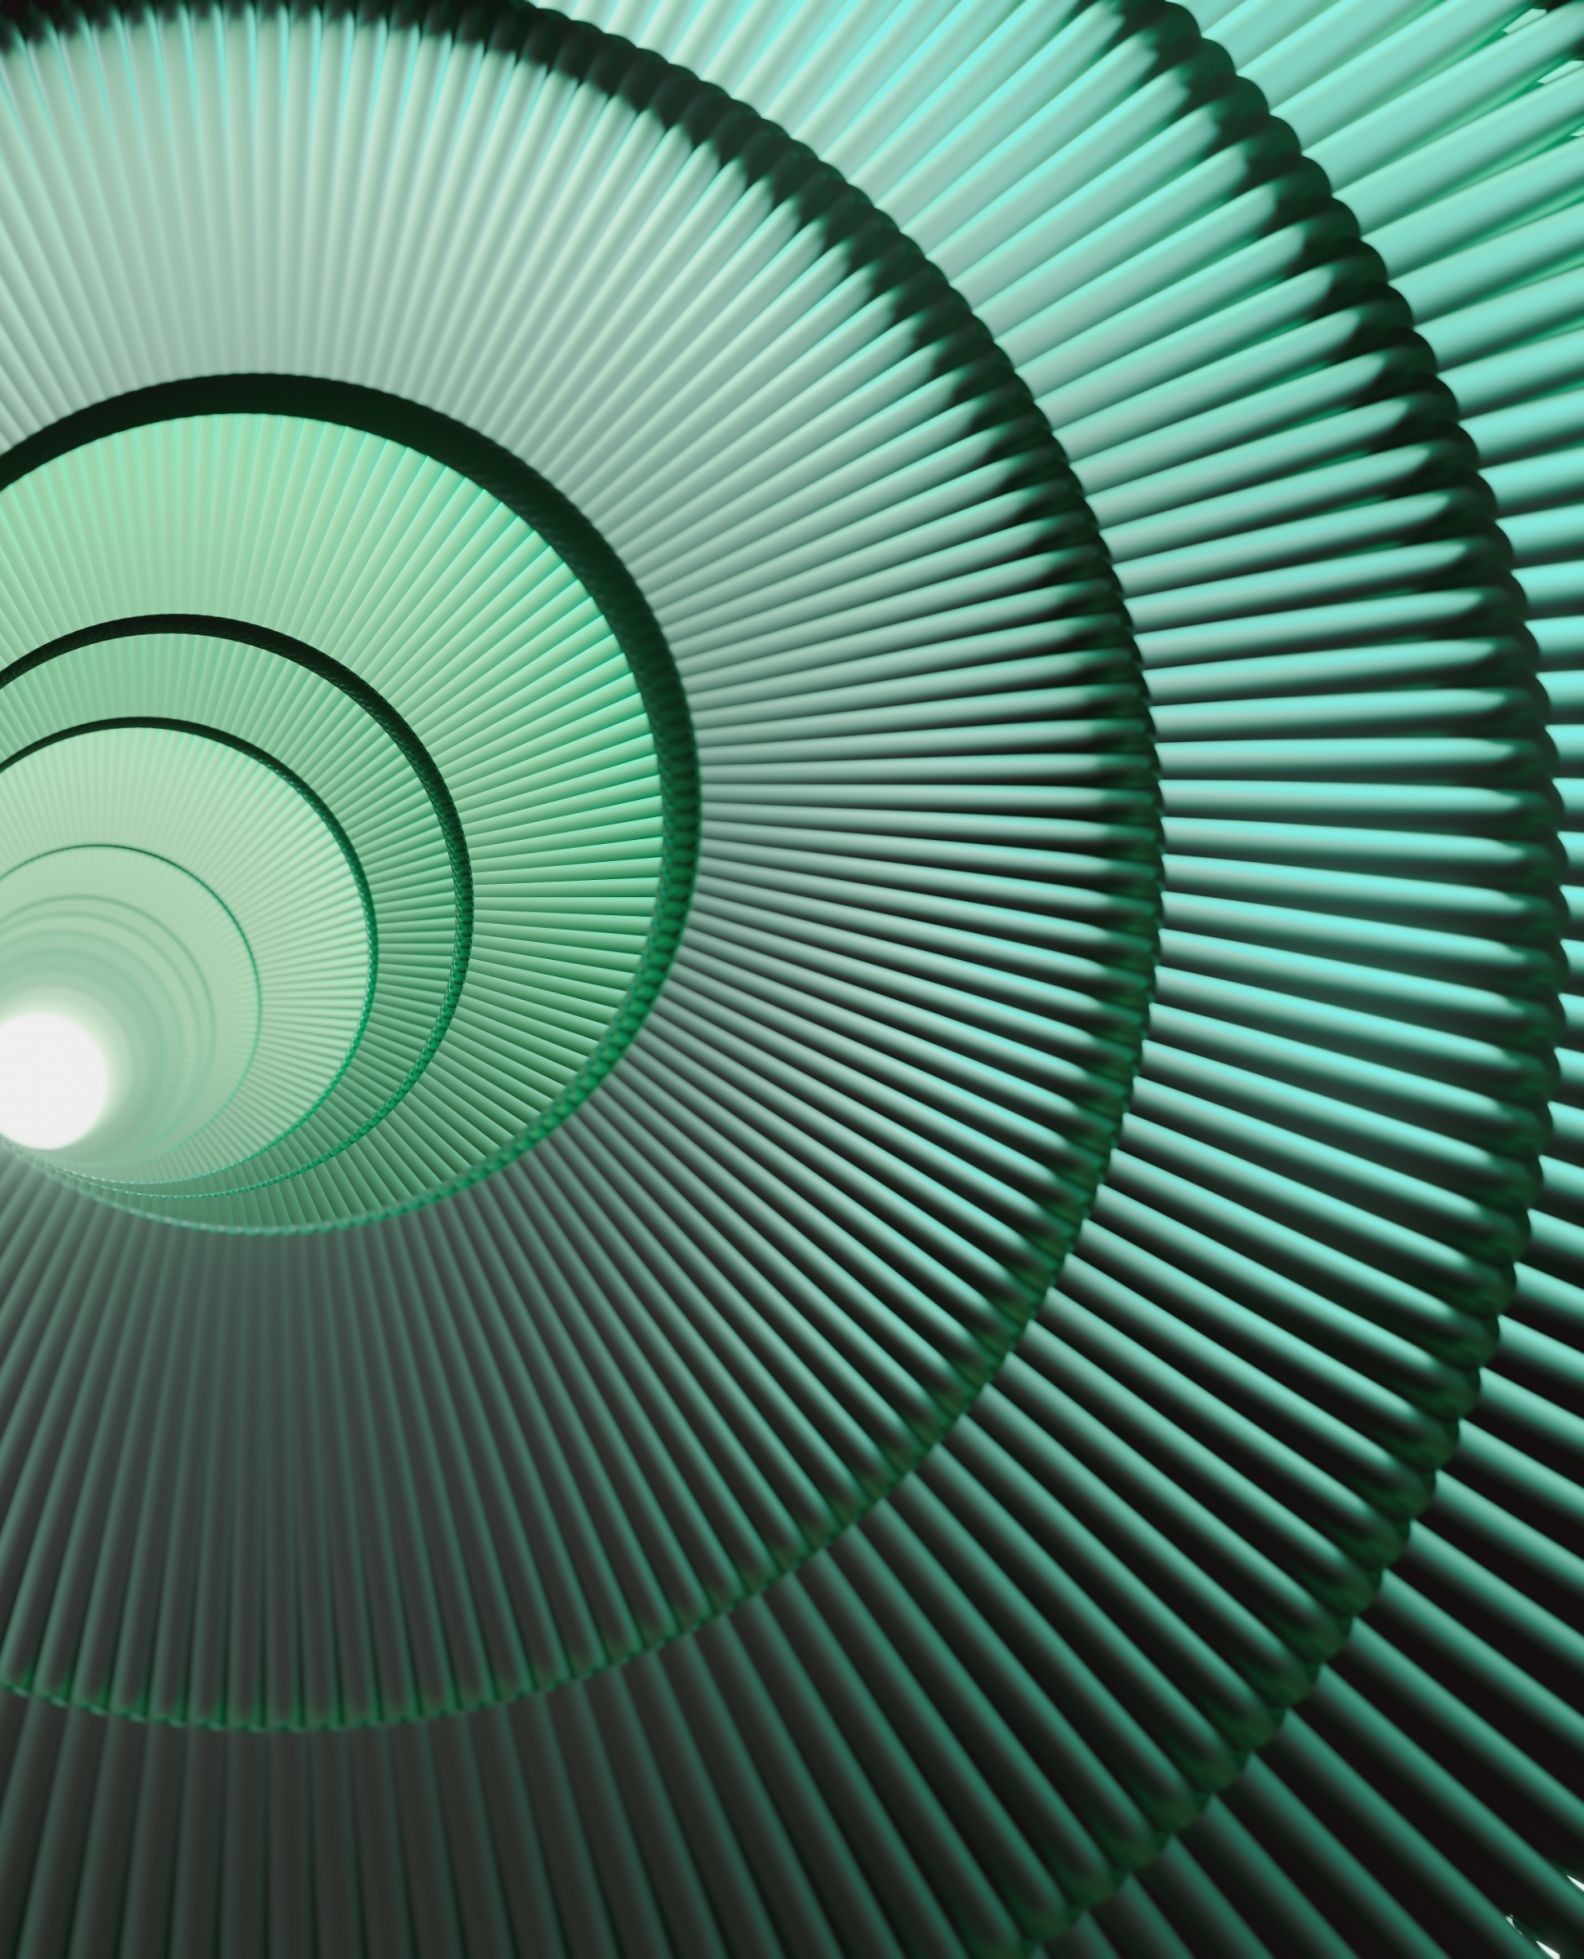 Abstract illustration of green spirals